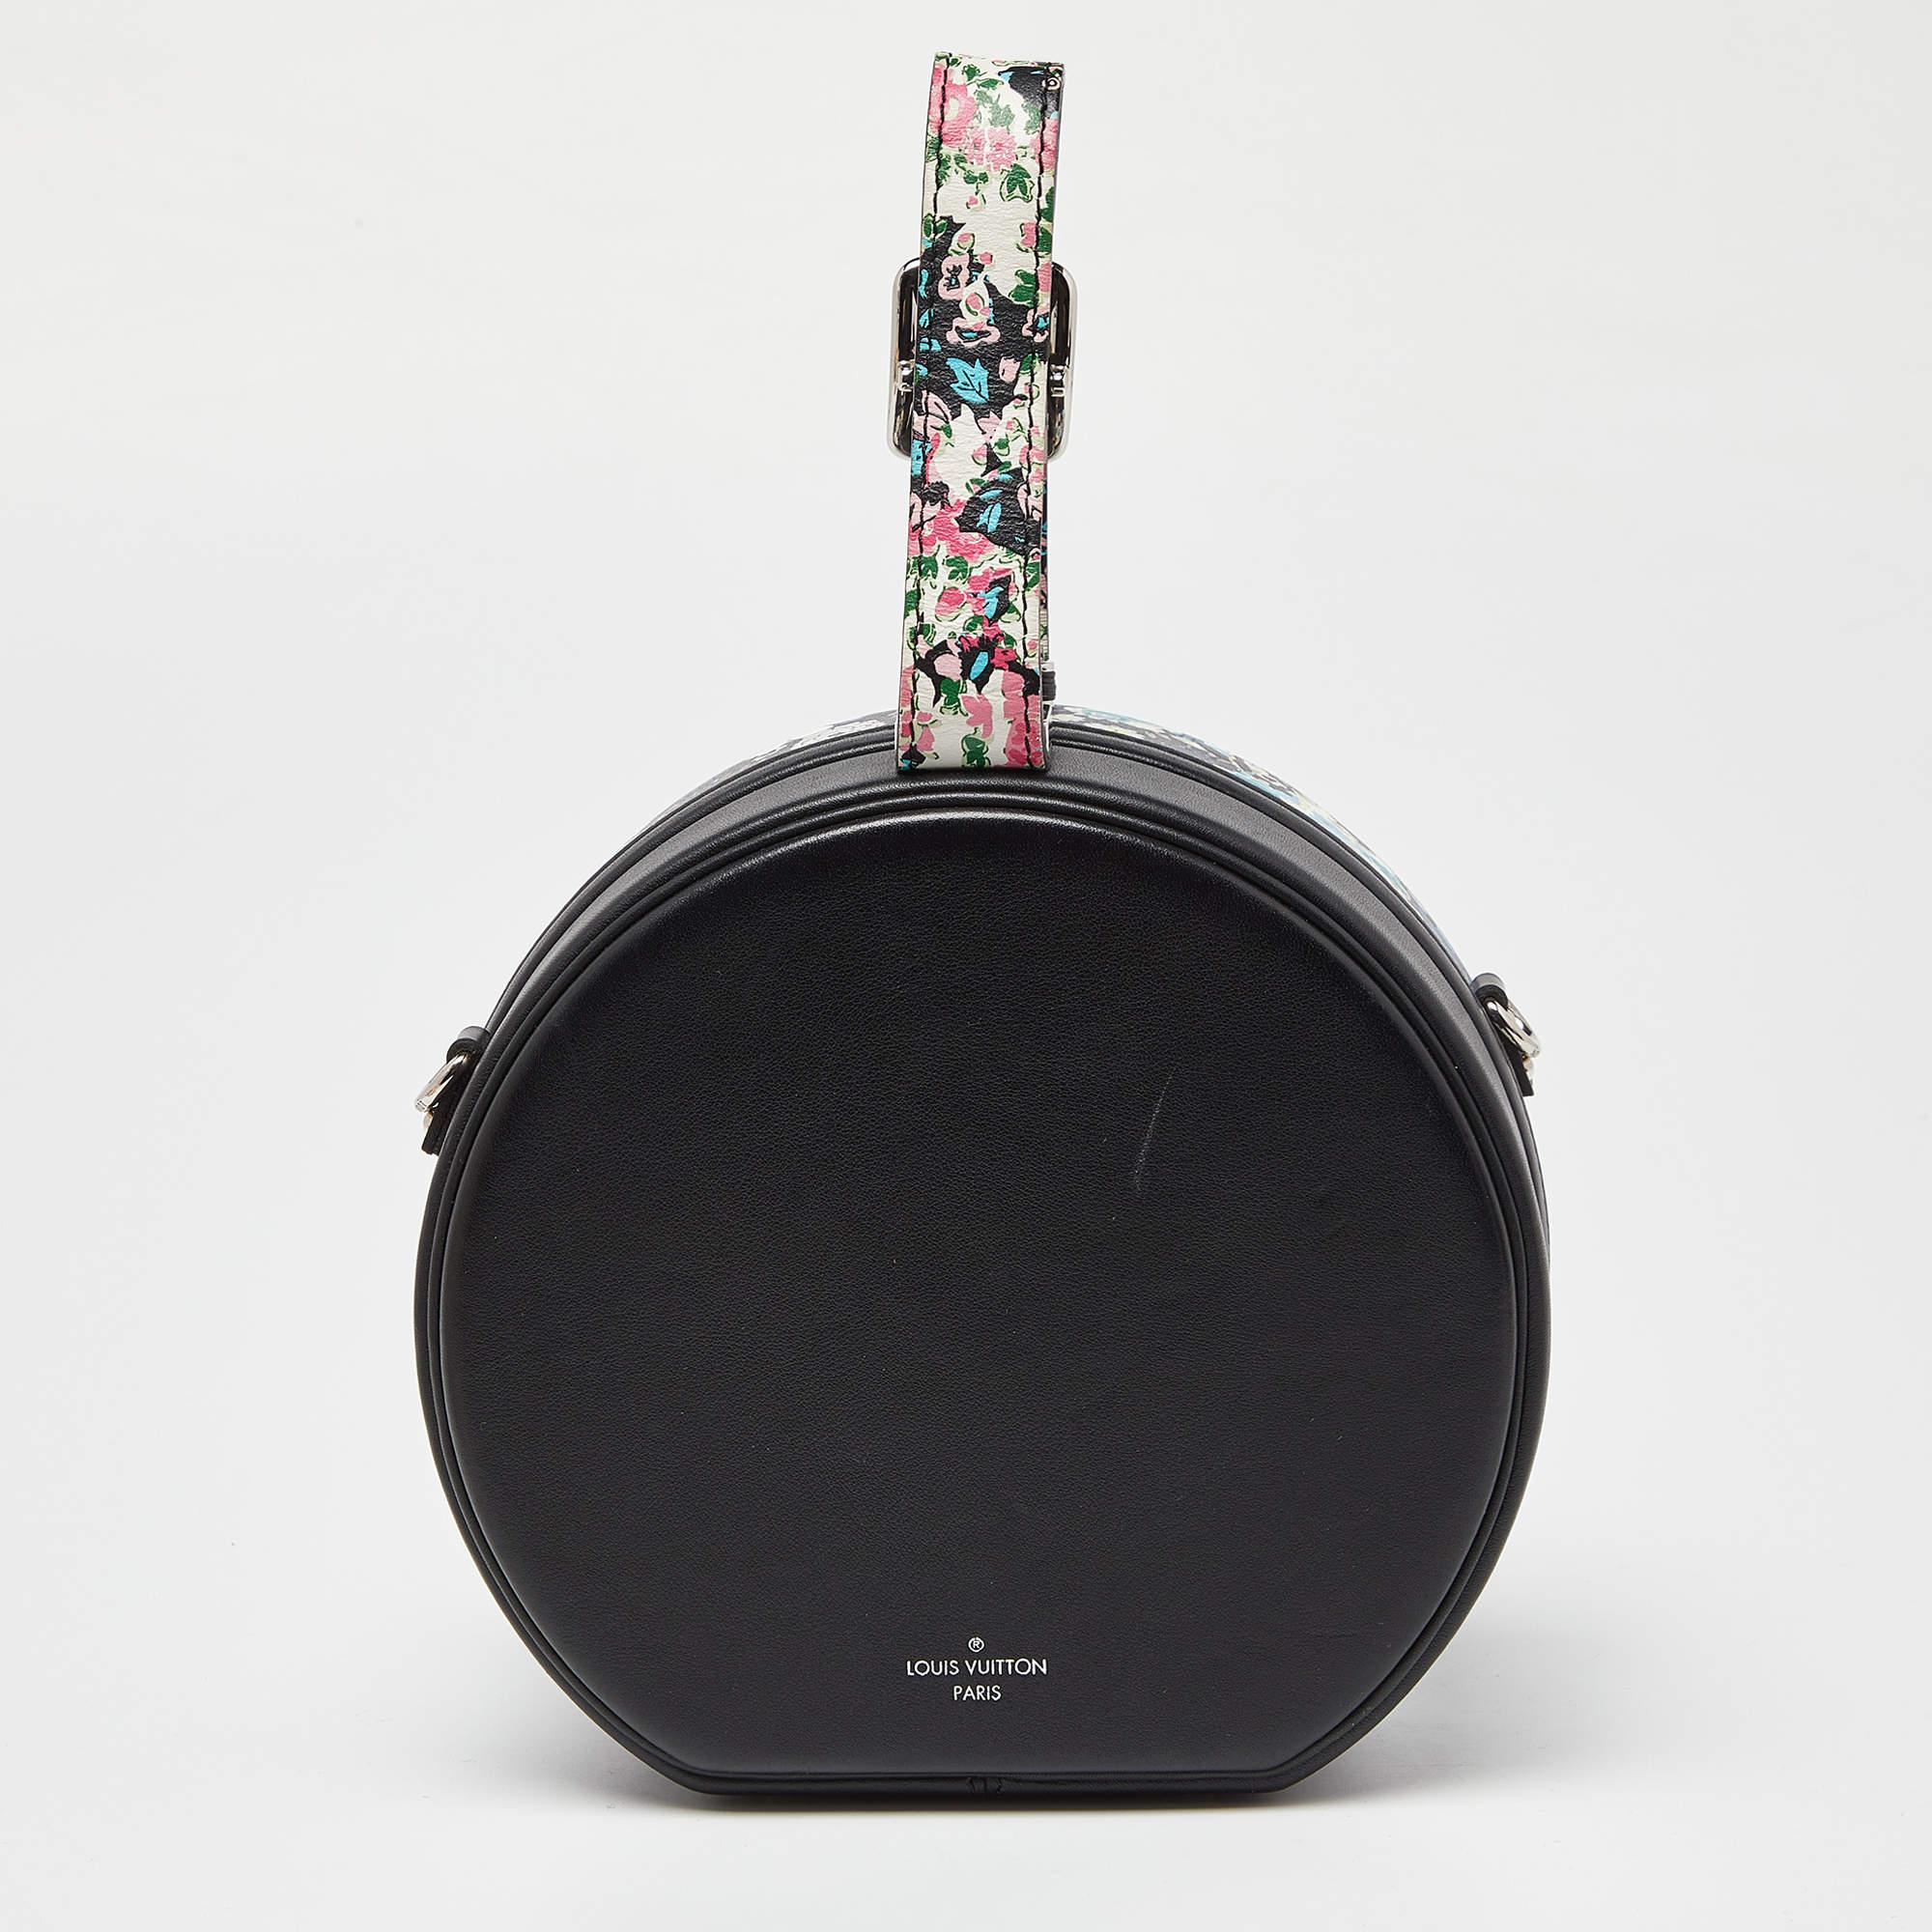 First seen on the Cruise 2018 runway show, Nicolas Ghesquière designed the Petite Boite Chapeau as a reimagined version of one of the brand's famous travel bags, the Hatbox. This bag is made from floral-print leather in the signature circular shape